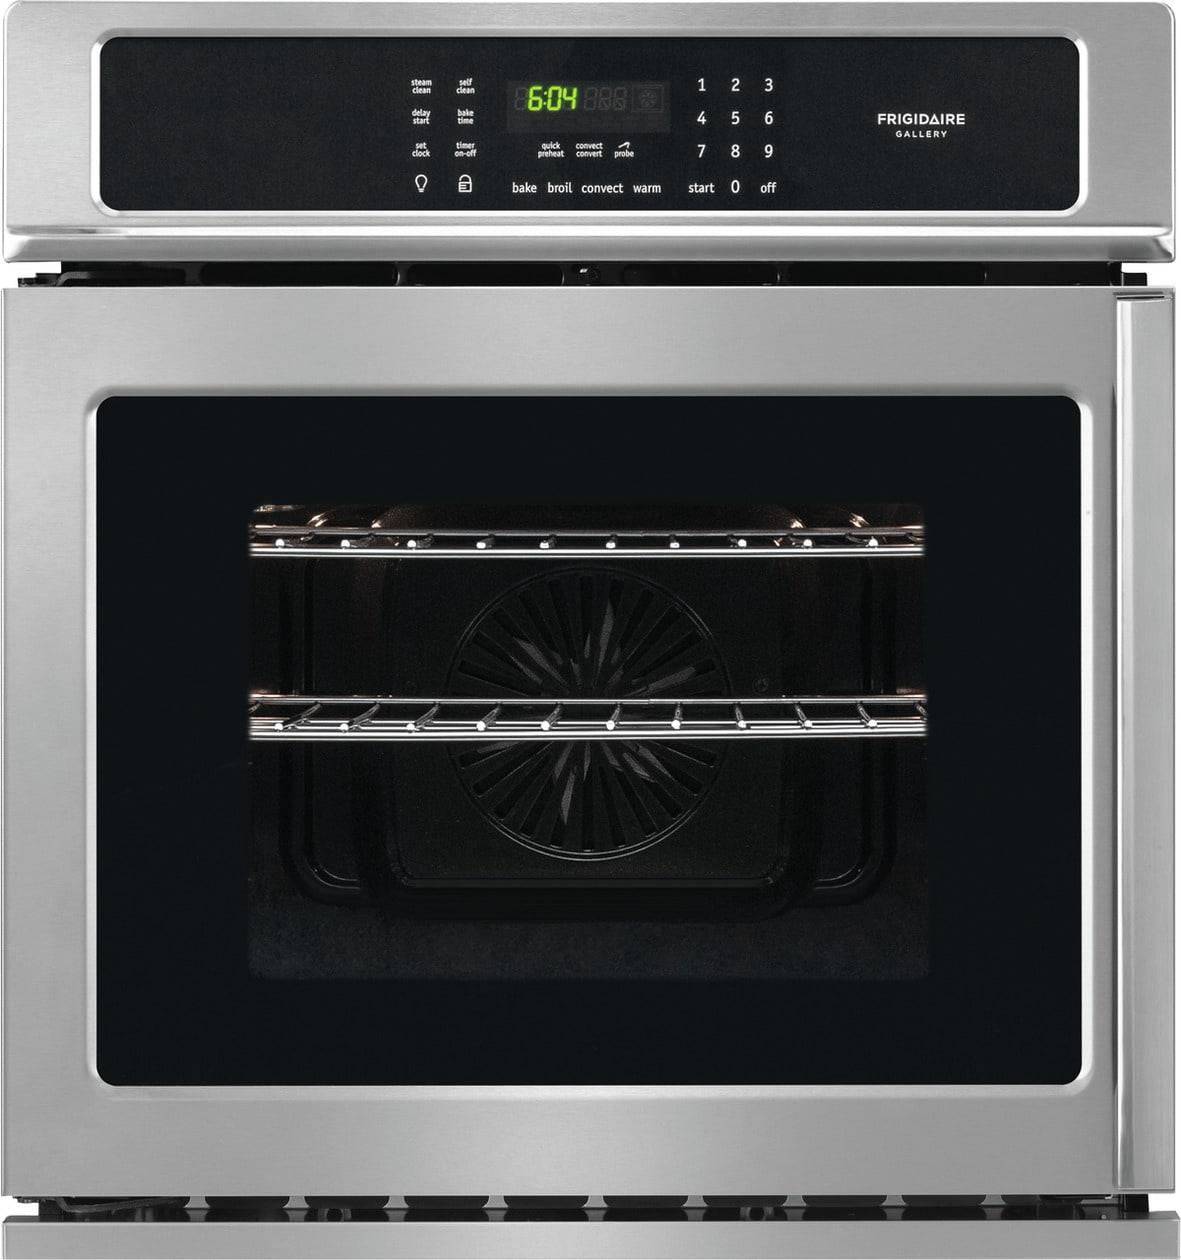 Frigidaire Gallery 27" Single Electric Wall Oven